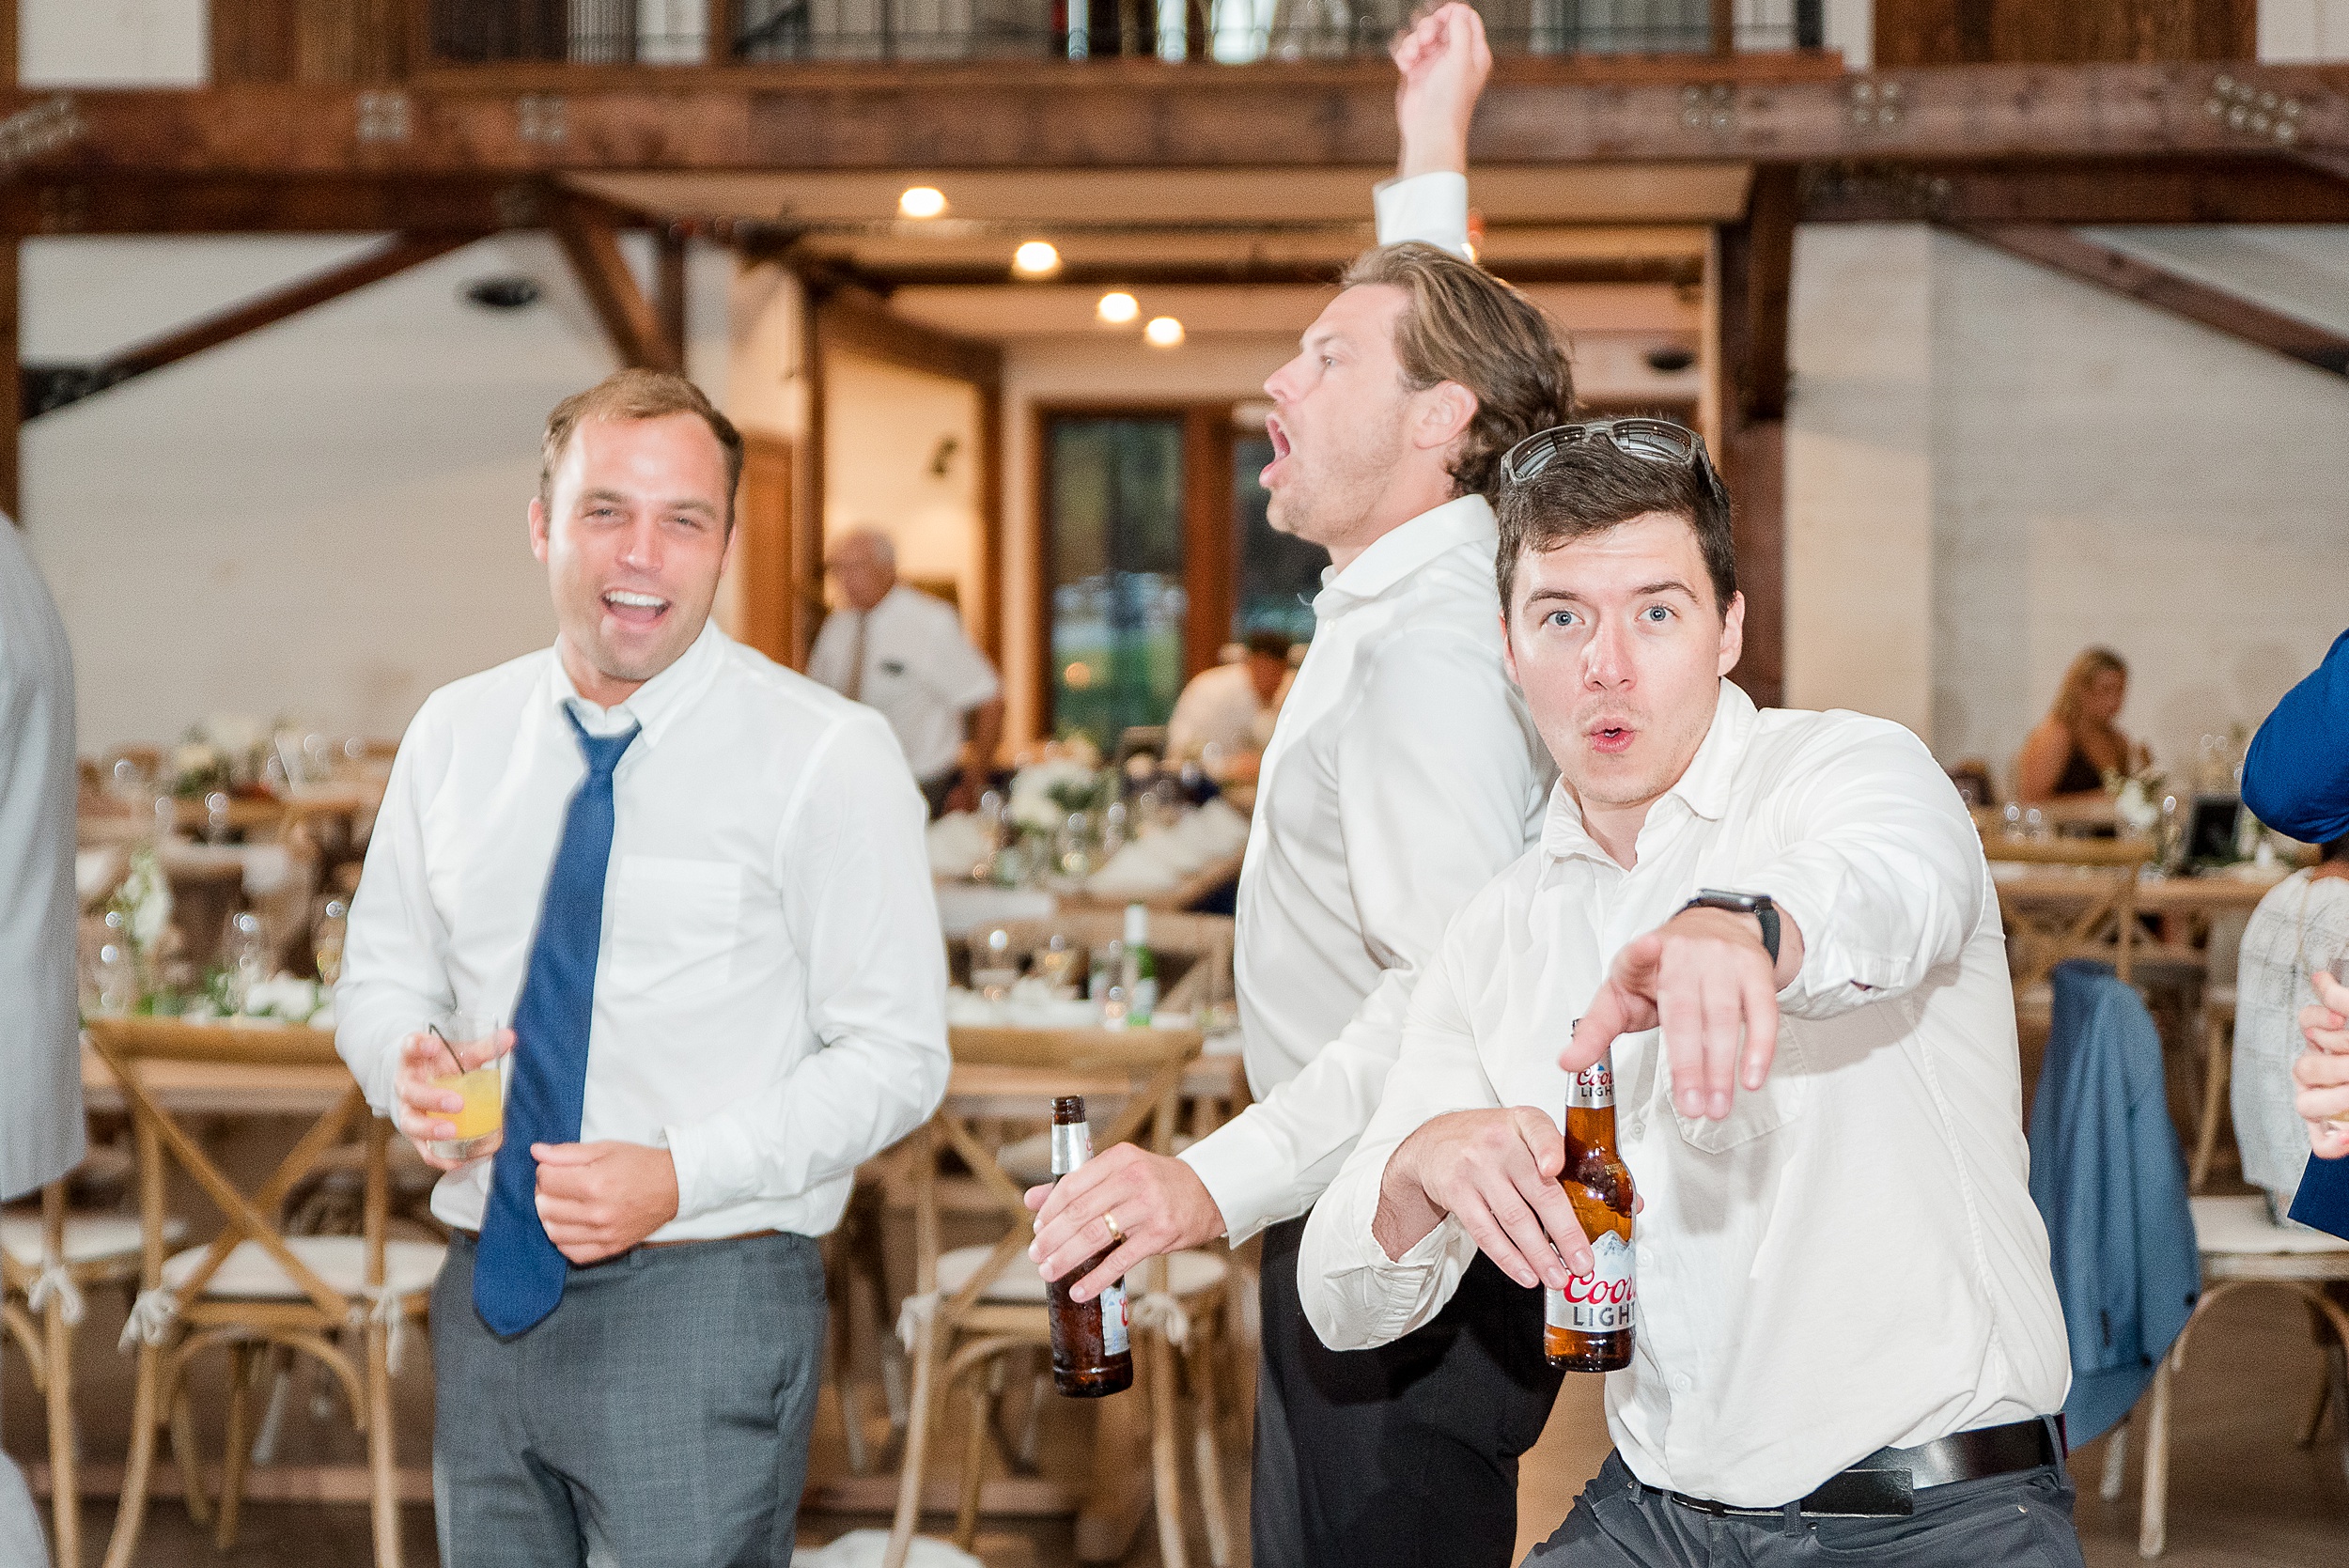 A group of groomsmen dance wildly during a wedding reception